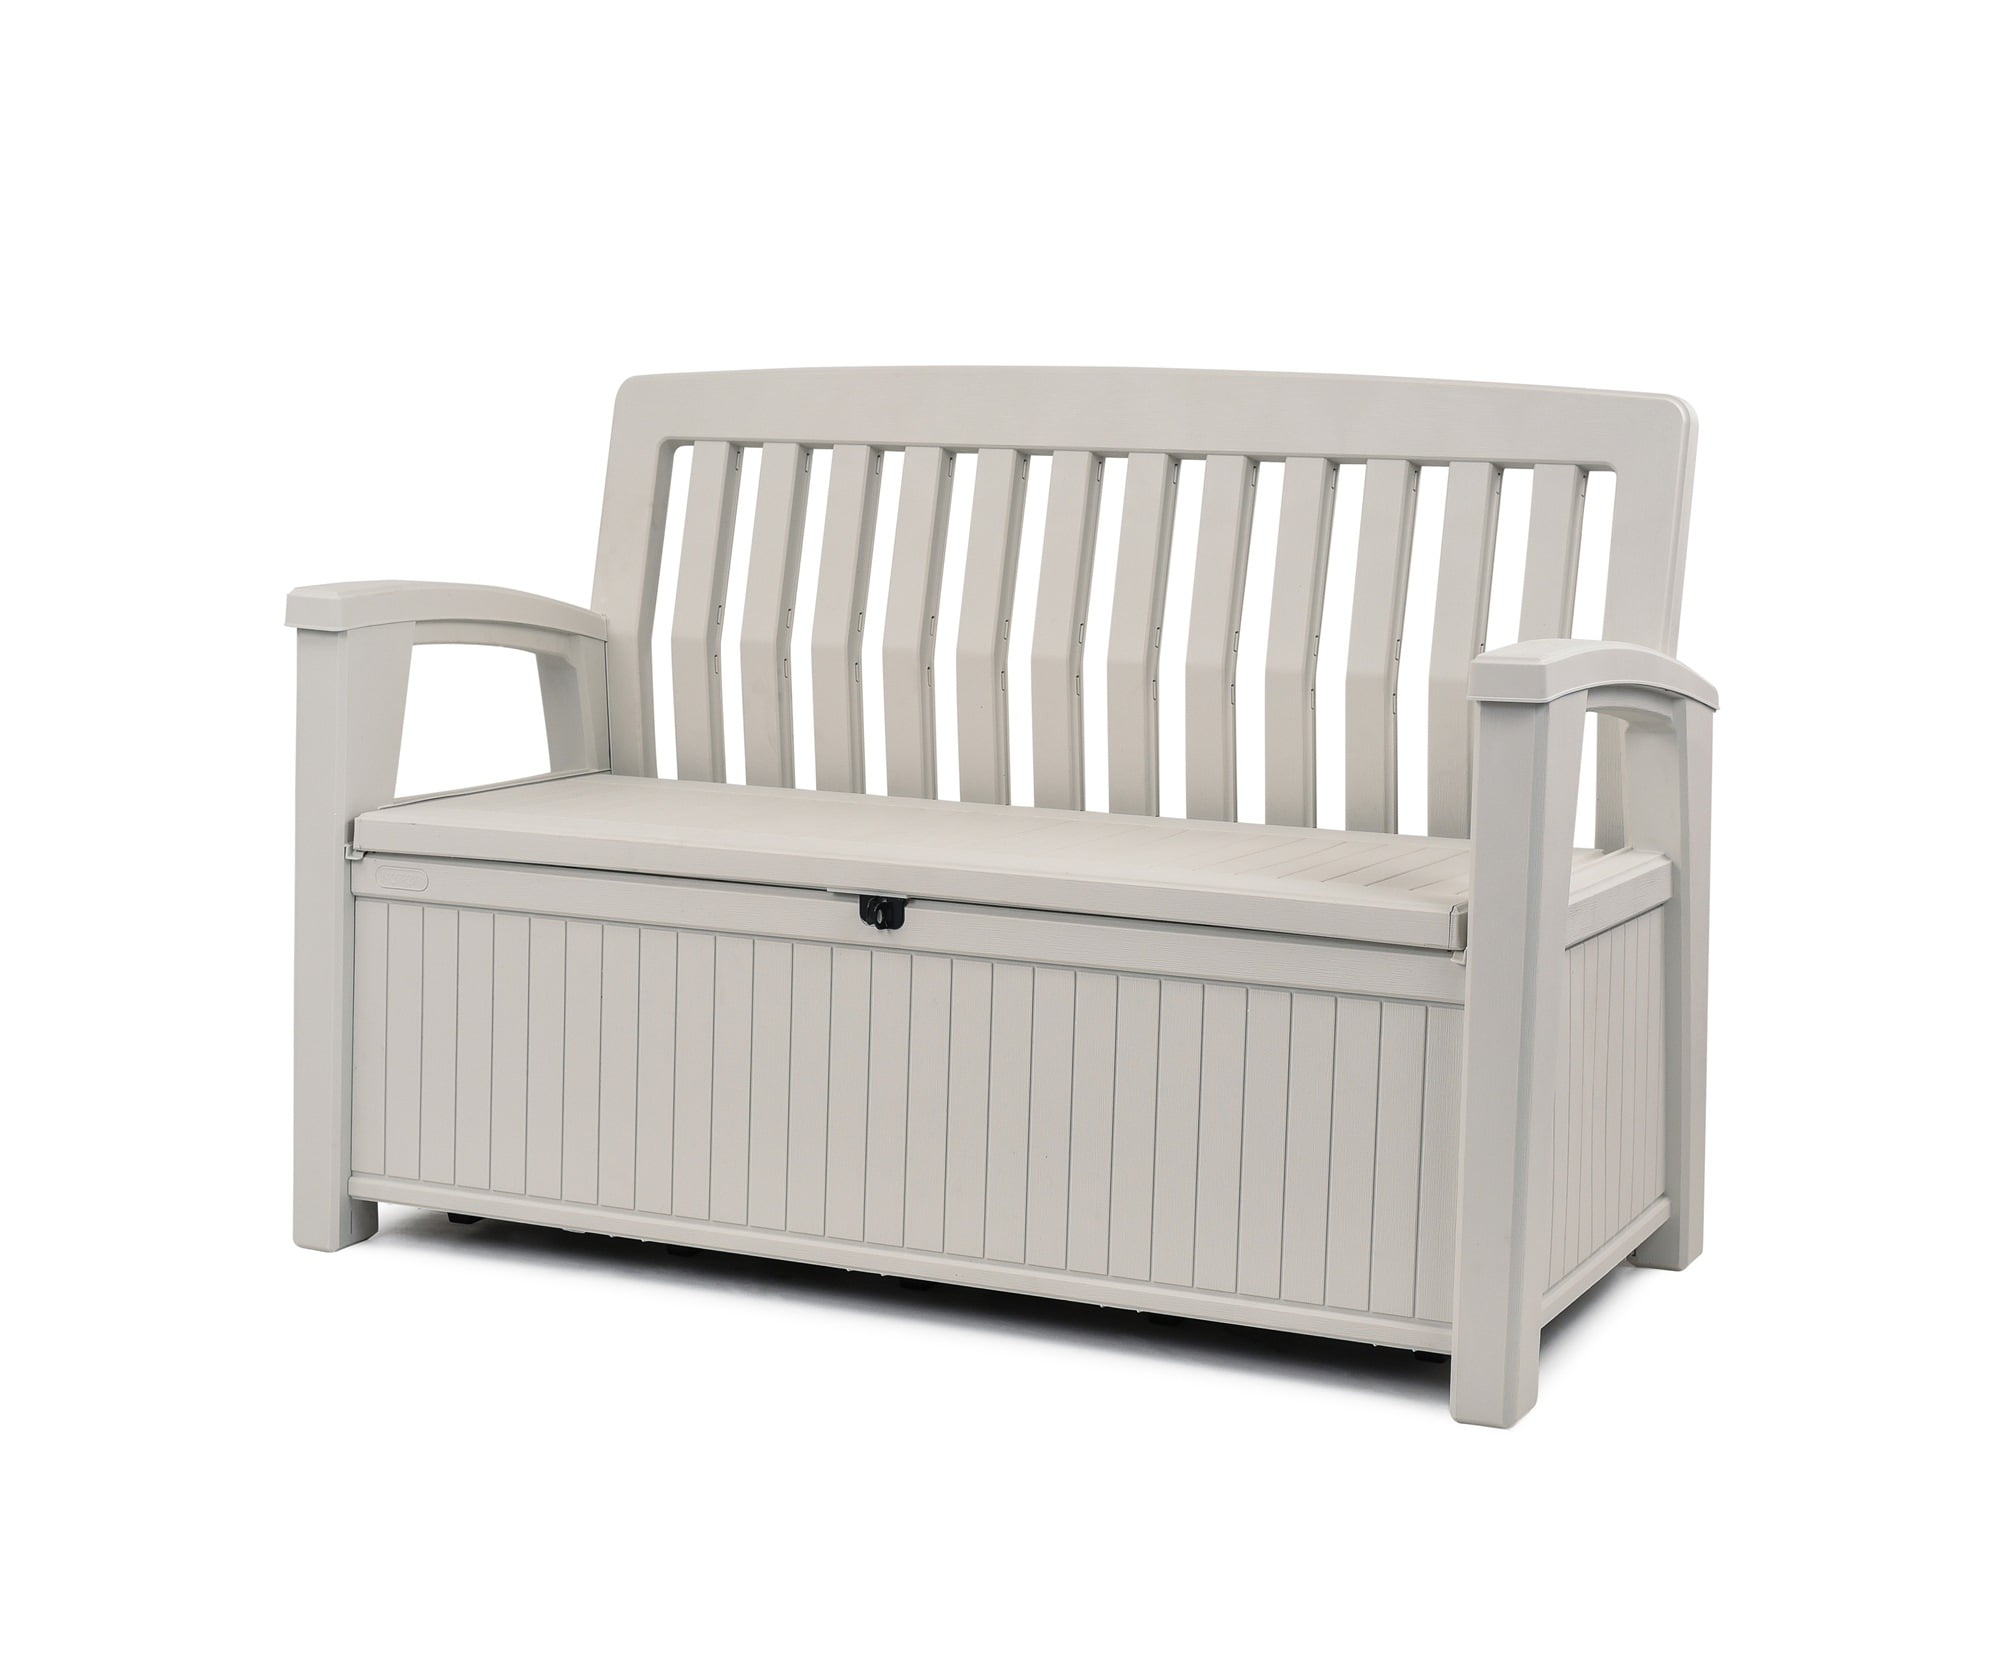 Keter Outdoor Storage Resin Bench, White Outdoor Patio Bench With Storage